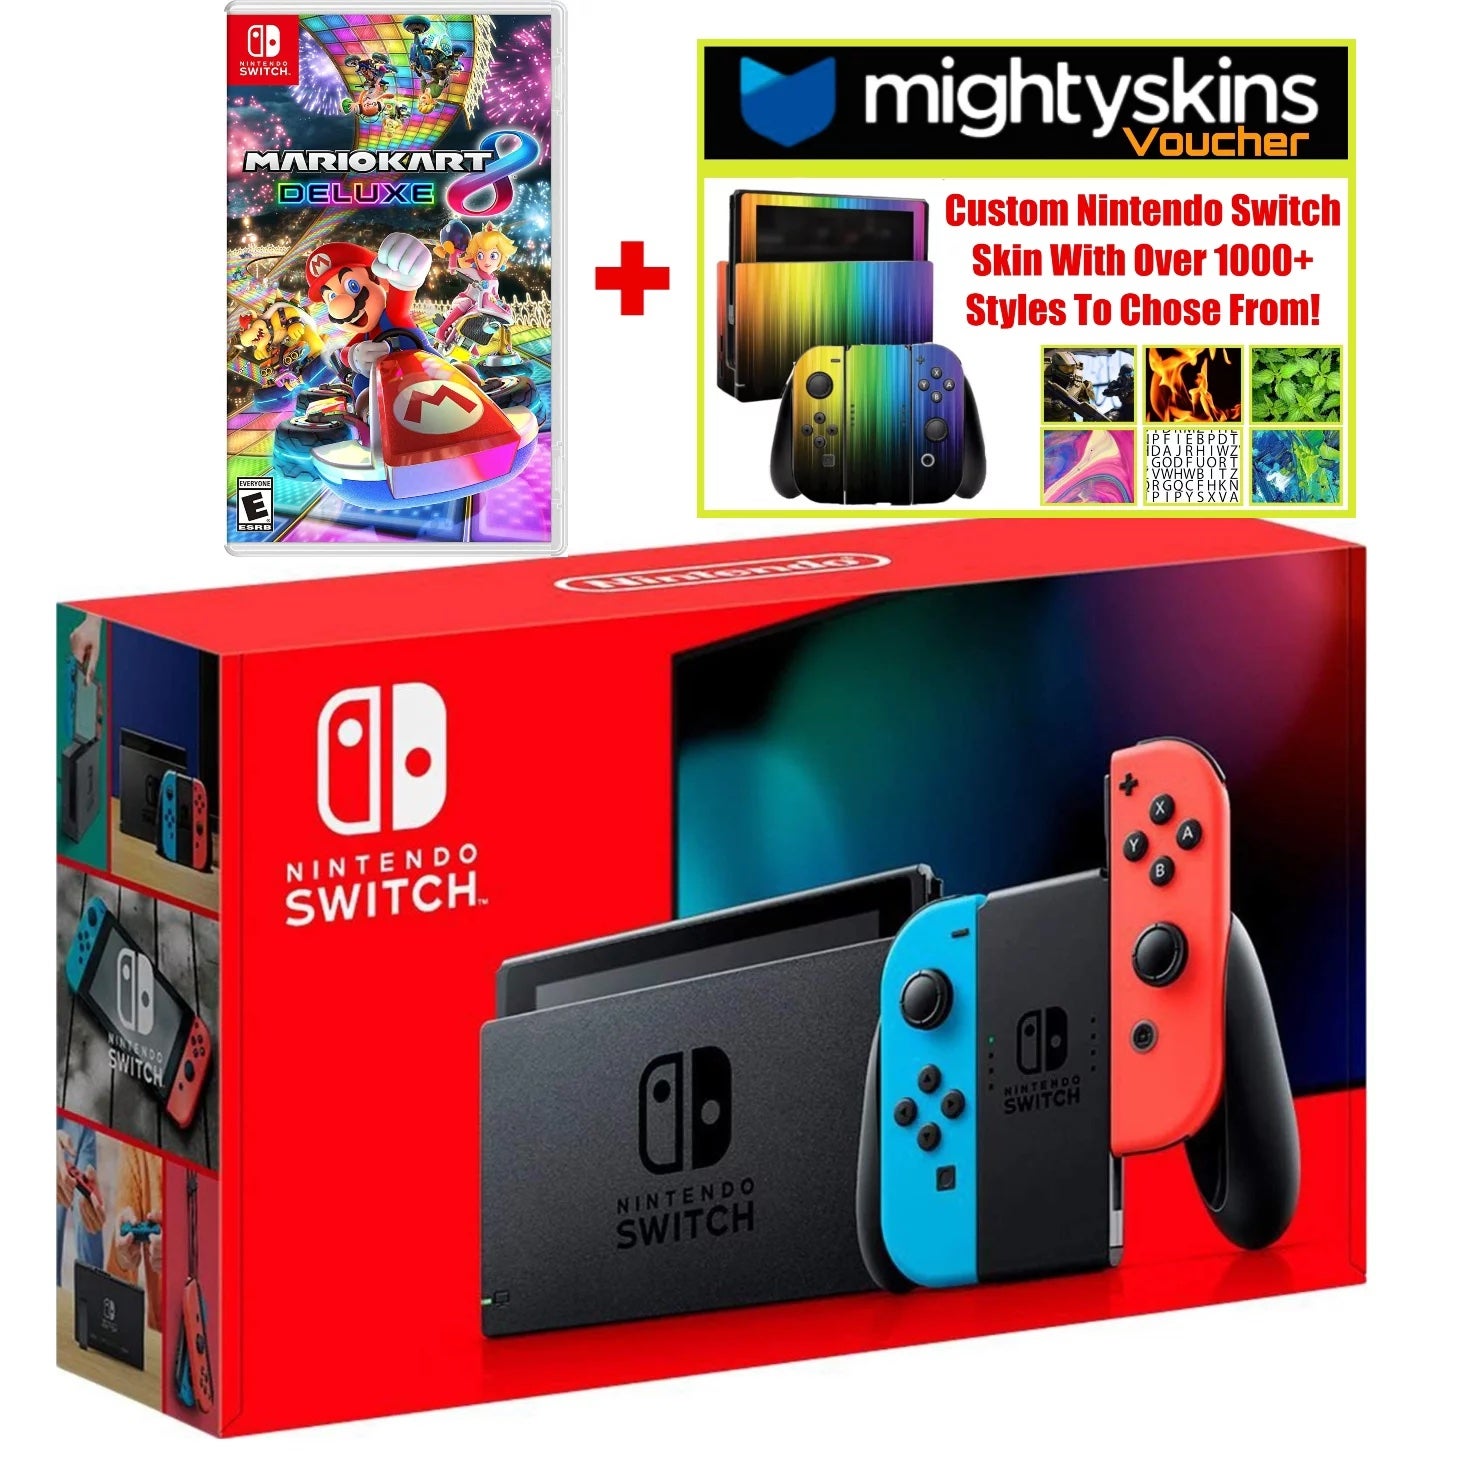 The best Nintendo Switch Black Friday deals you can shop now